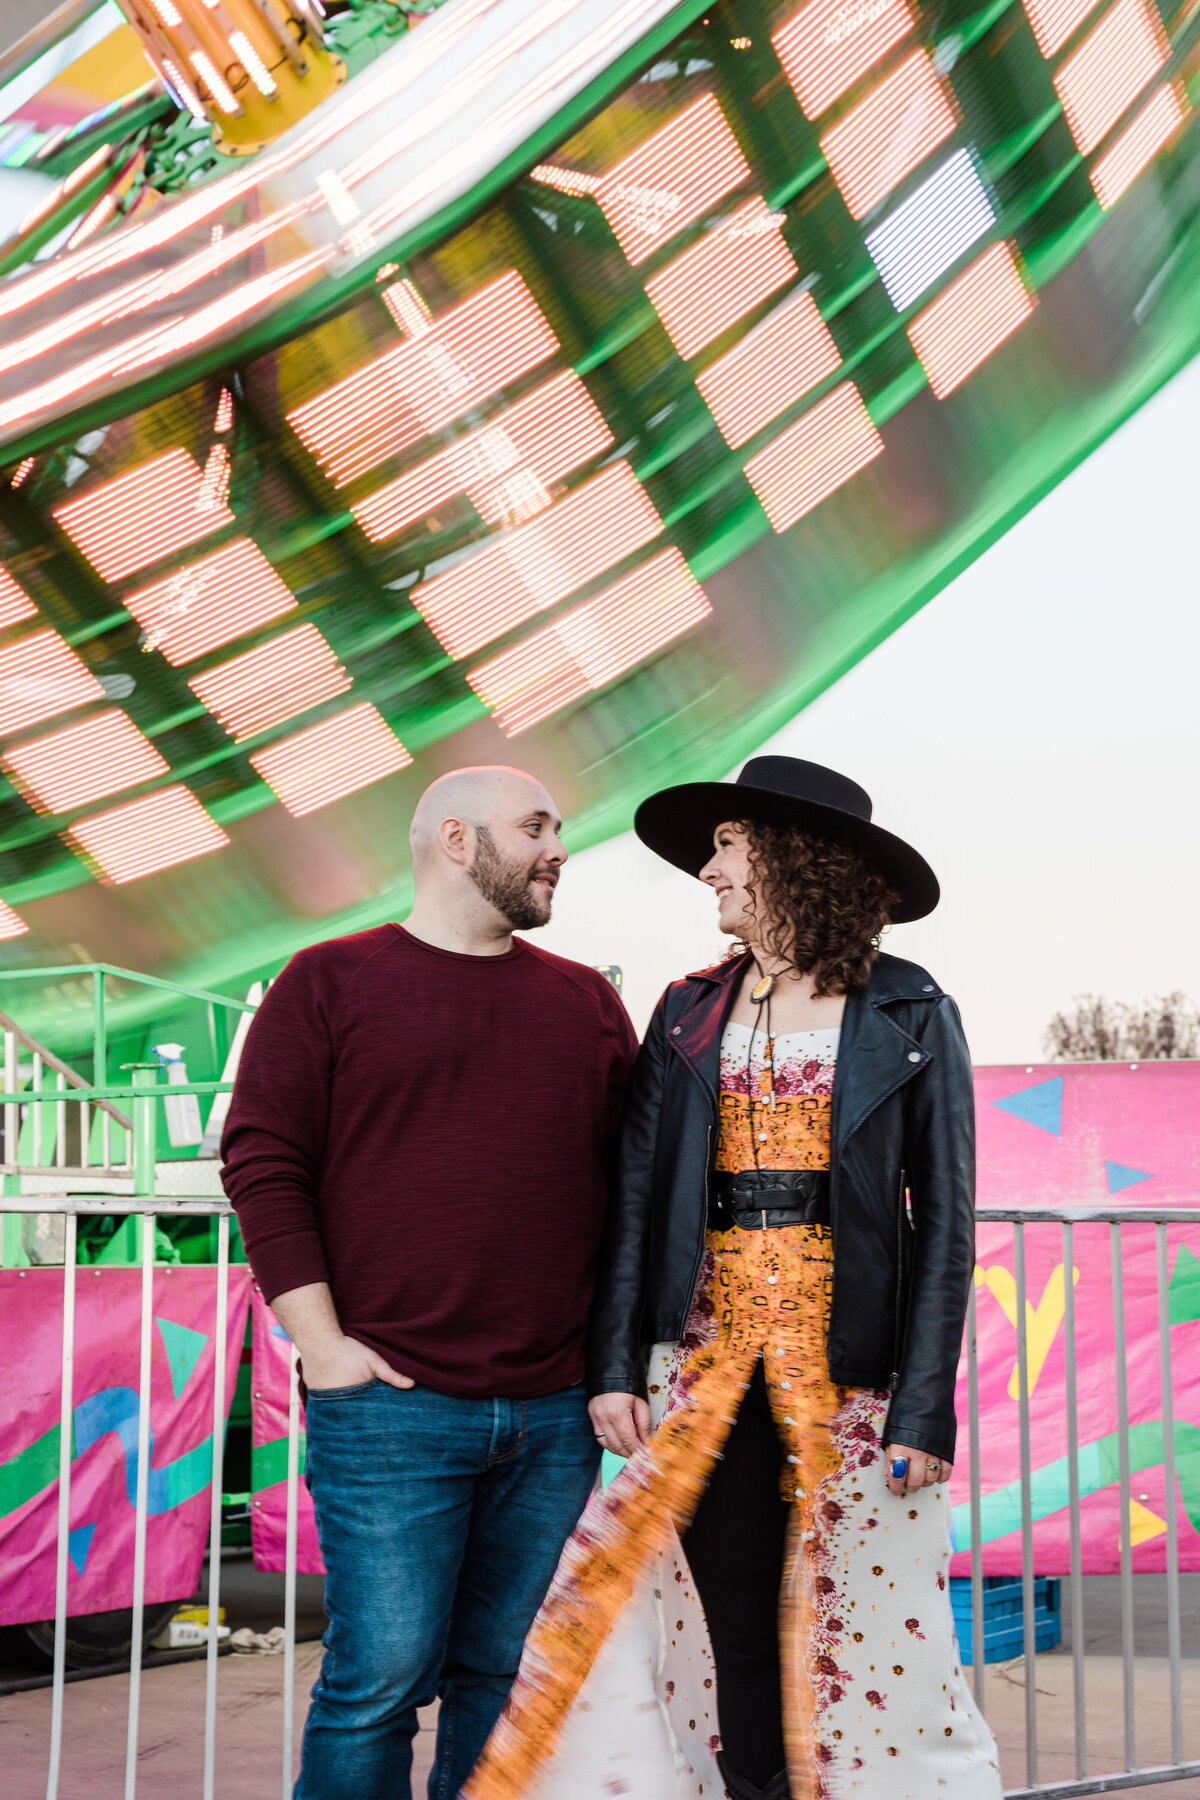 A couple holding hands and looking into each other's eyes in front of a rapidly spinning carnival ride during their engagement shoot at a carnival in DFW, Texas. The woman on the right is wearing a large brimmed black hat, black leather jacket, and an intricately detailed and colorful dress. The man on the left is wearing a maroon sweater and jeans.